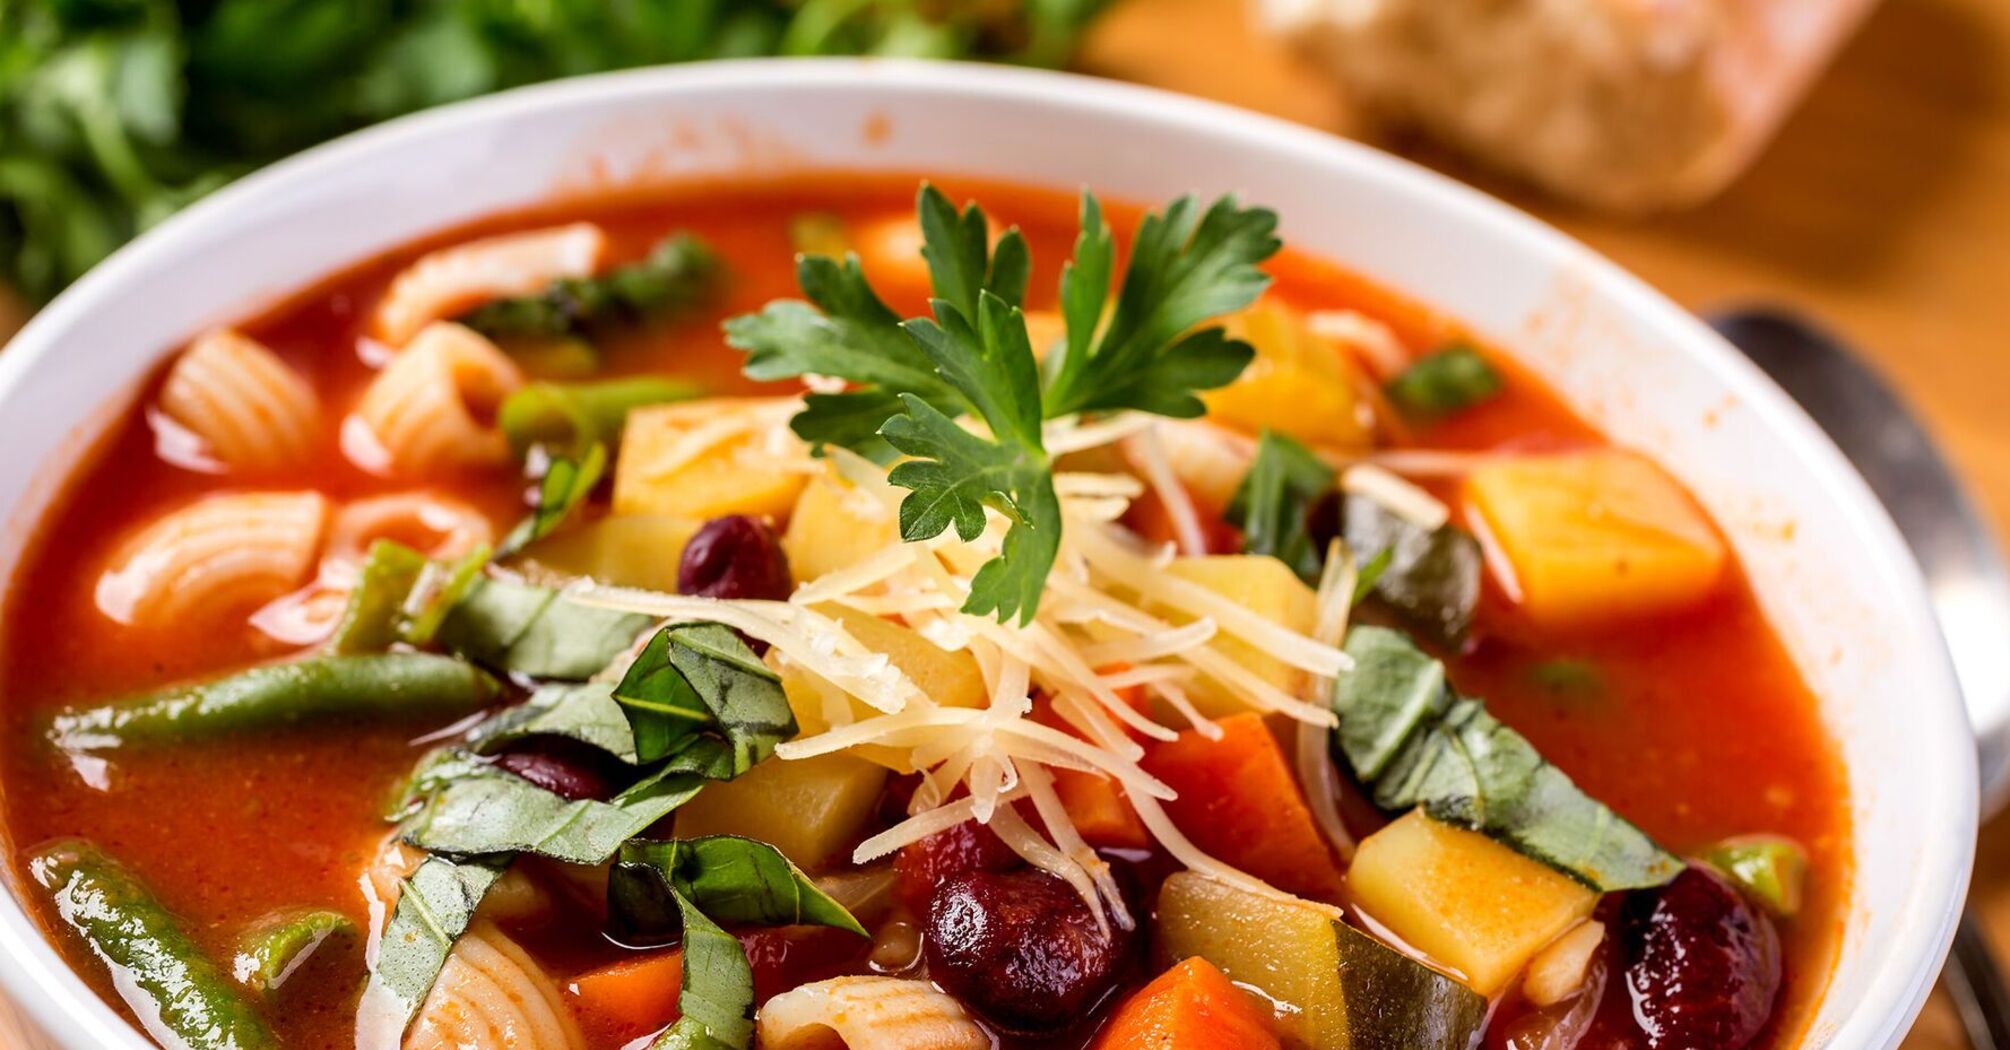 Scientists shared a recipe for minestrone soup for longevity